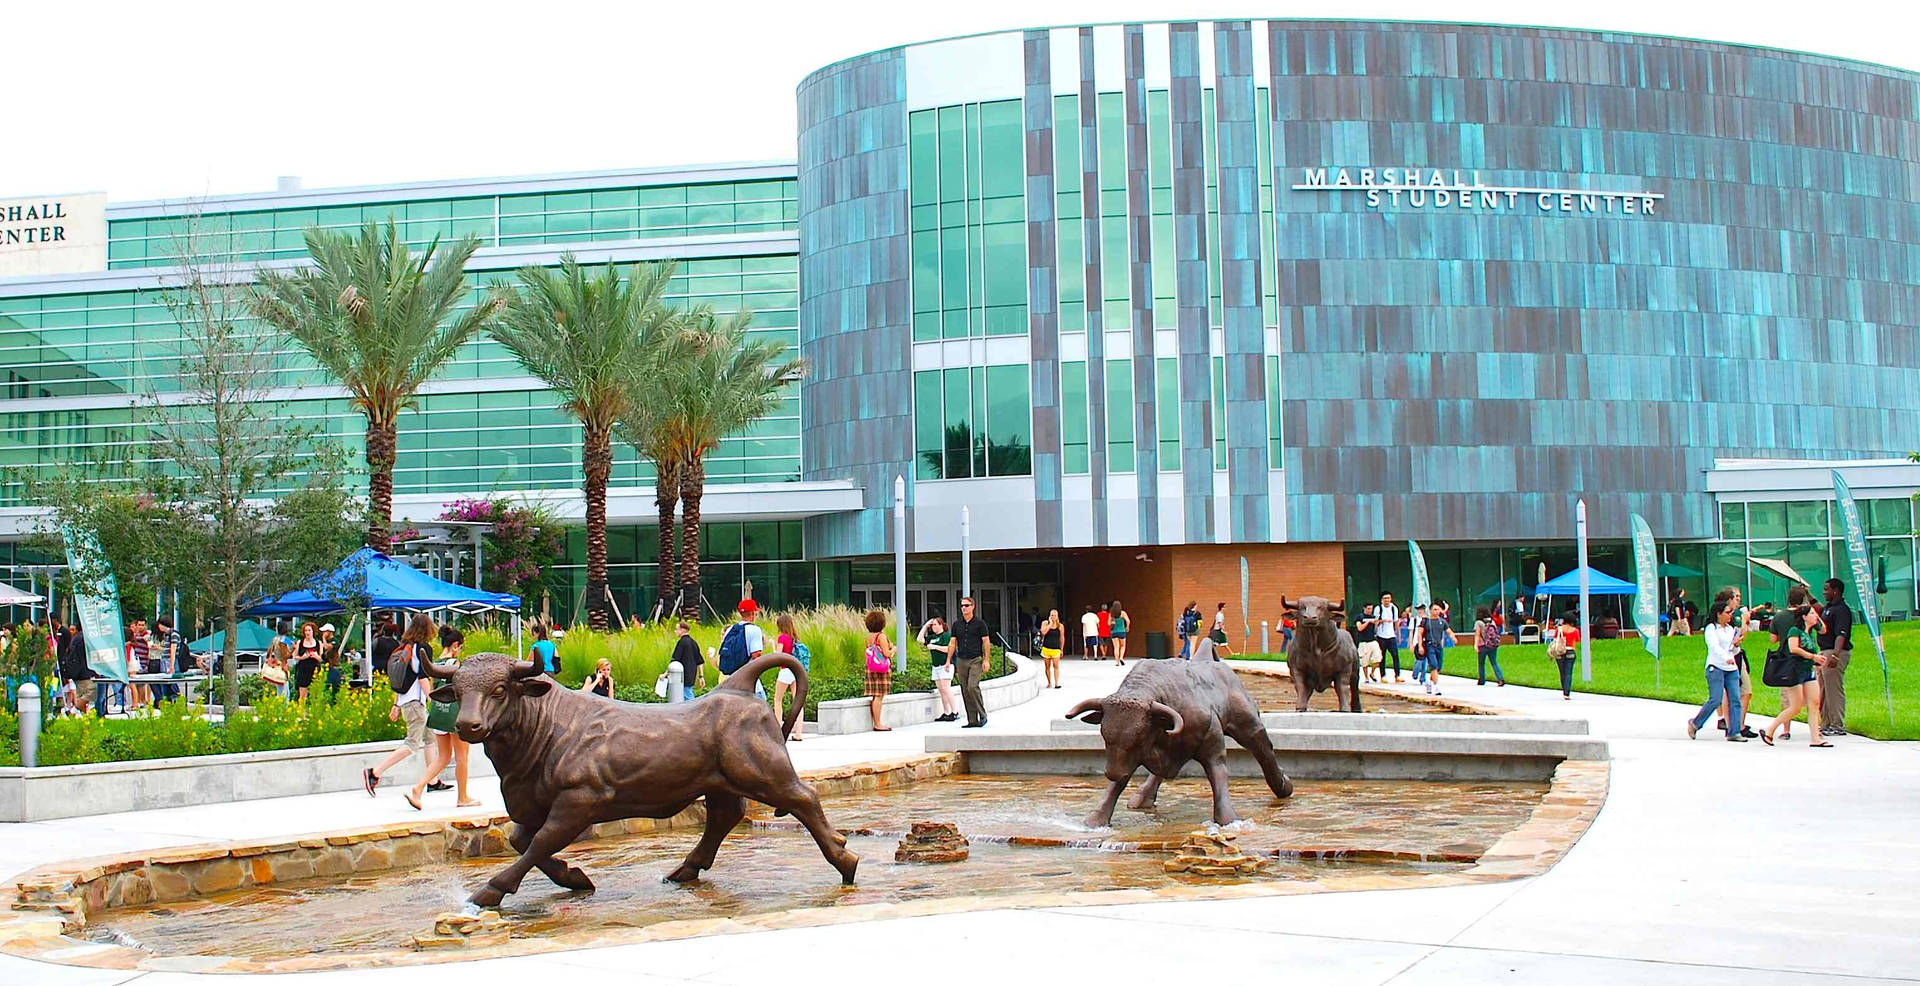 Students In University Of South Florida Campus Wallpaper